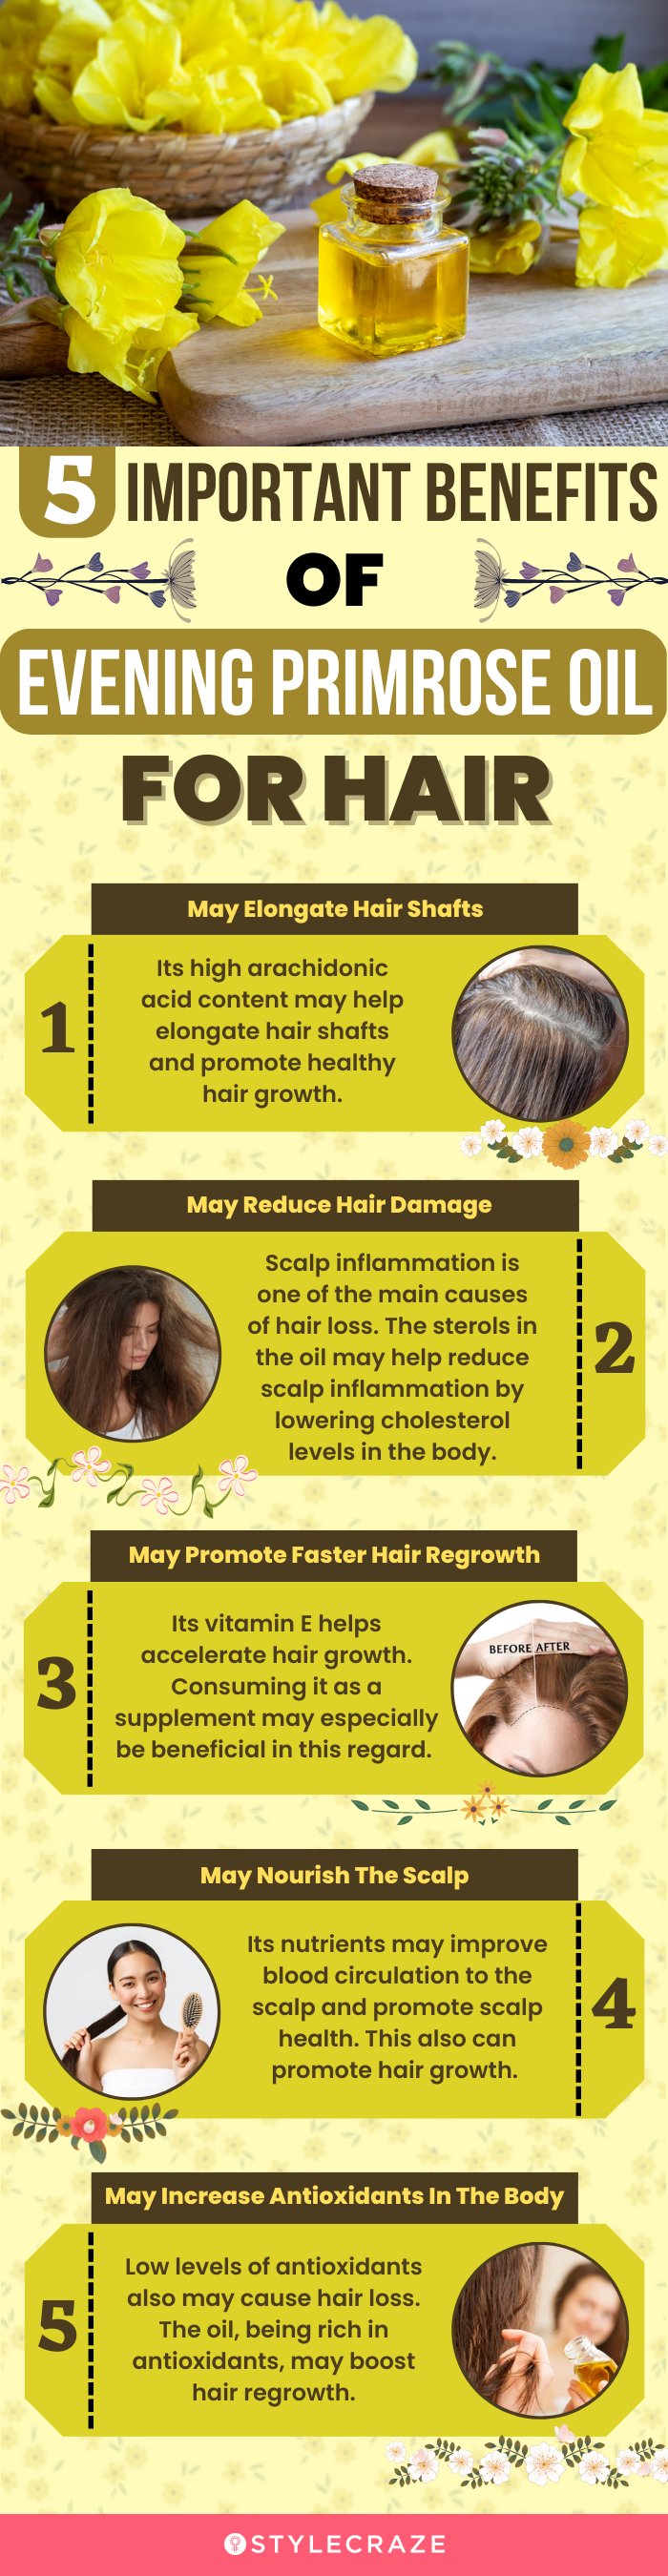 5 important benefits of evening primrose oil for hair (infographic)